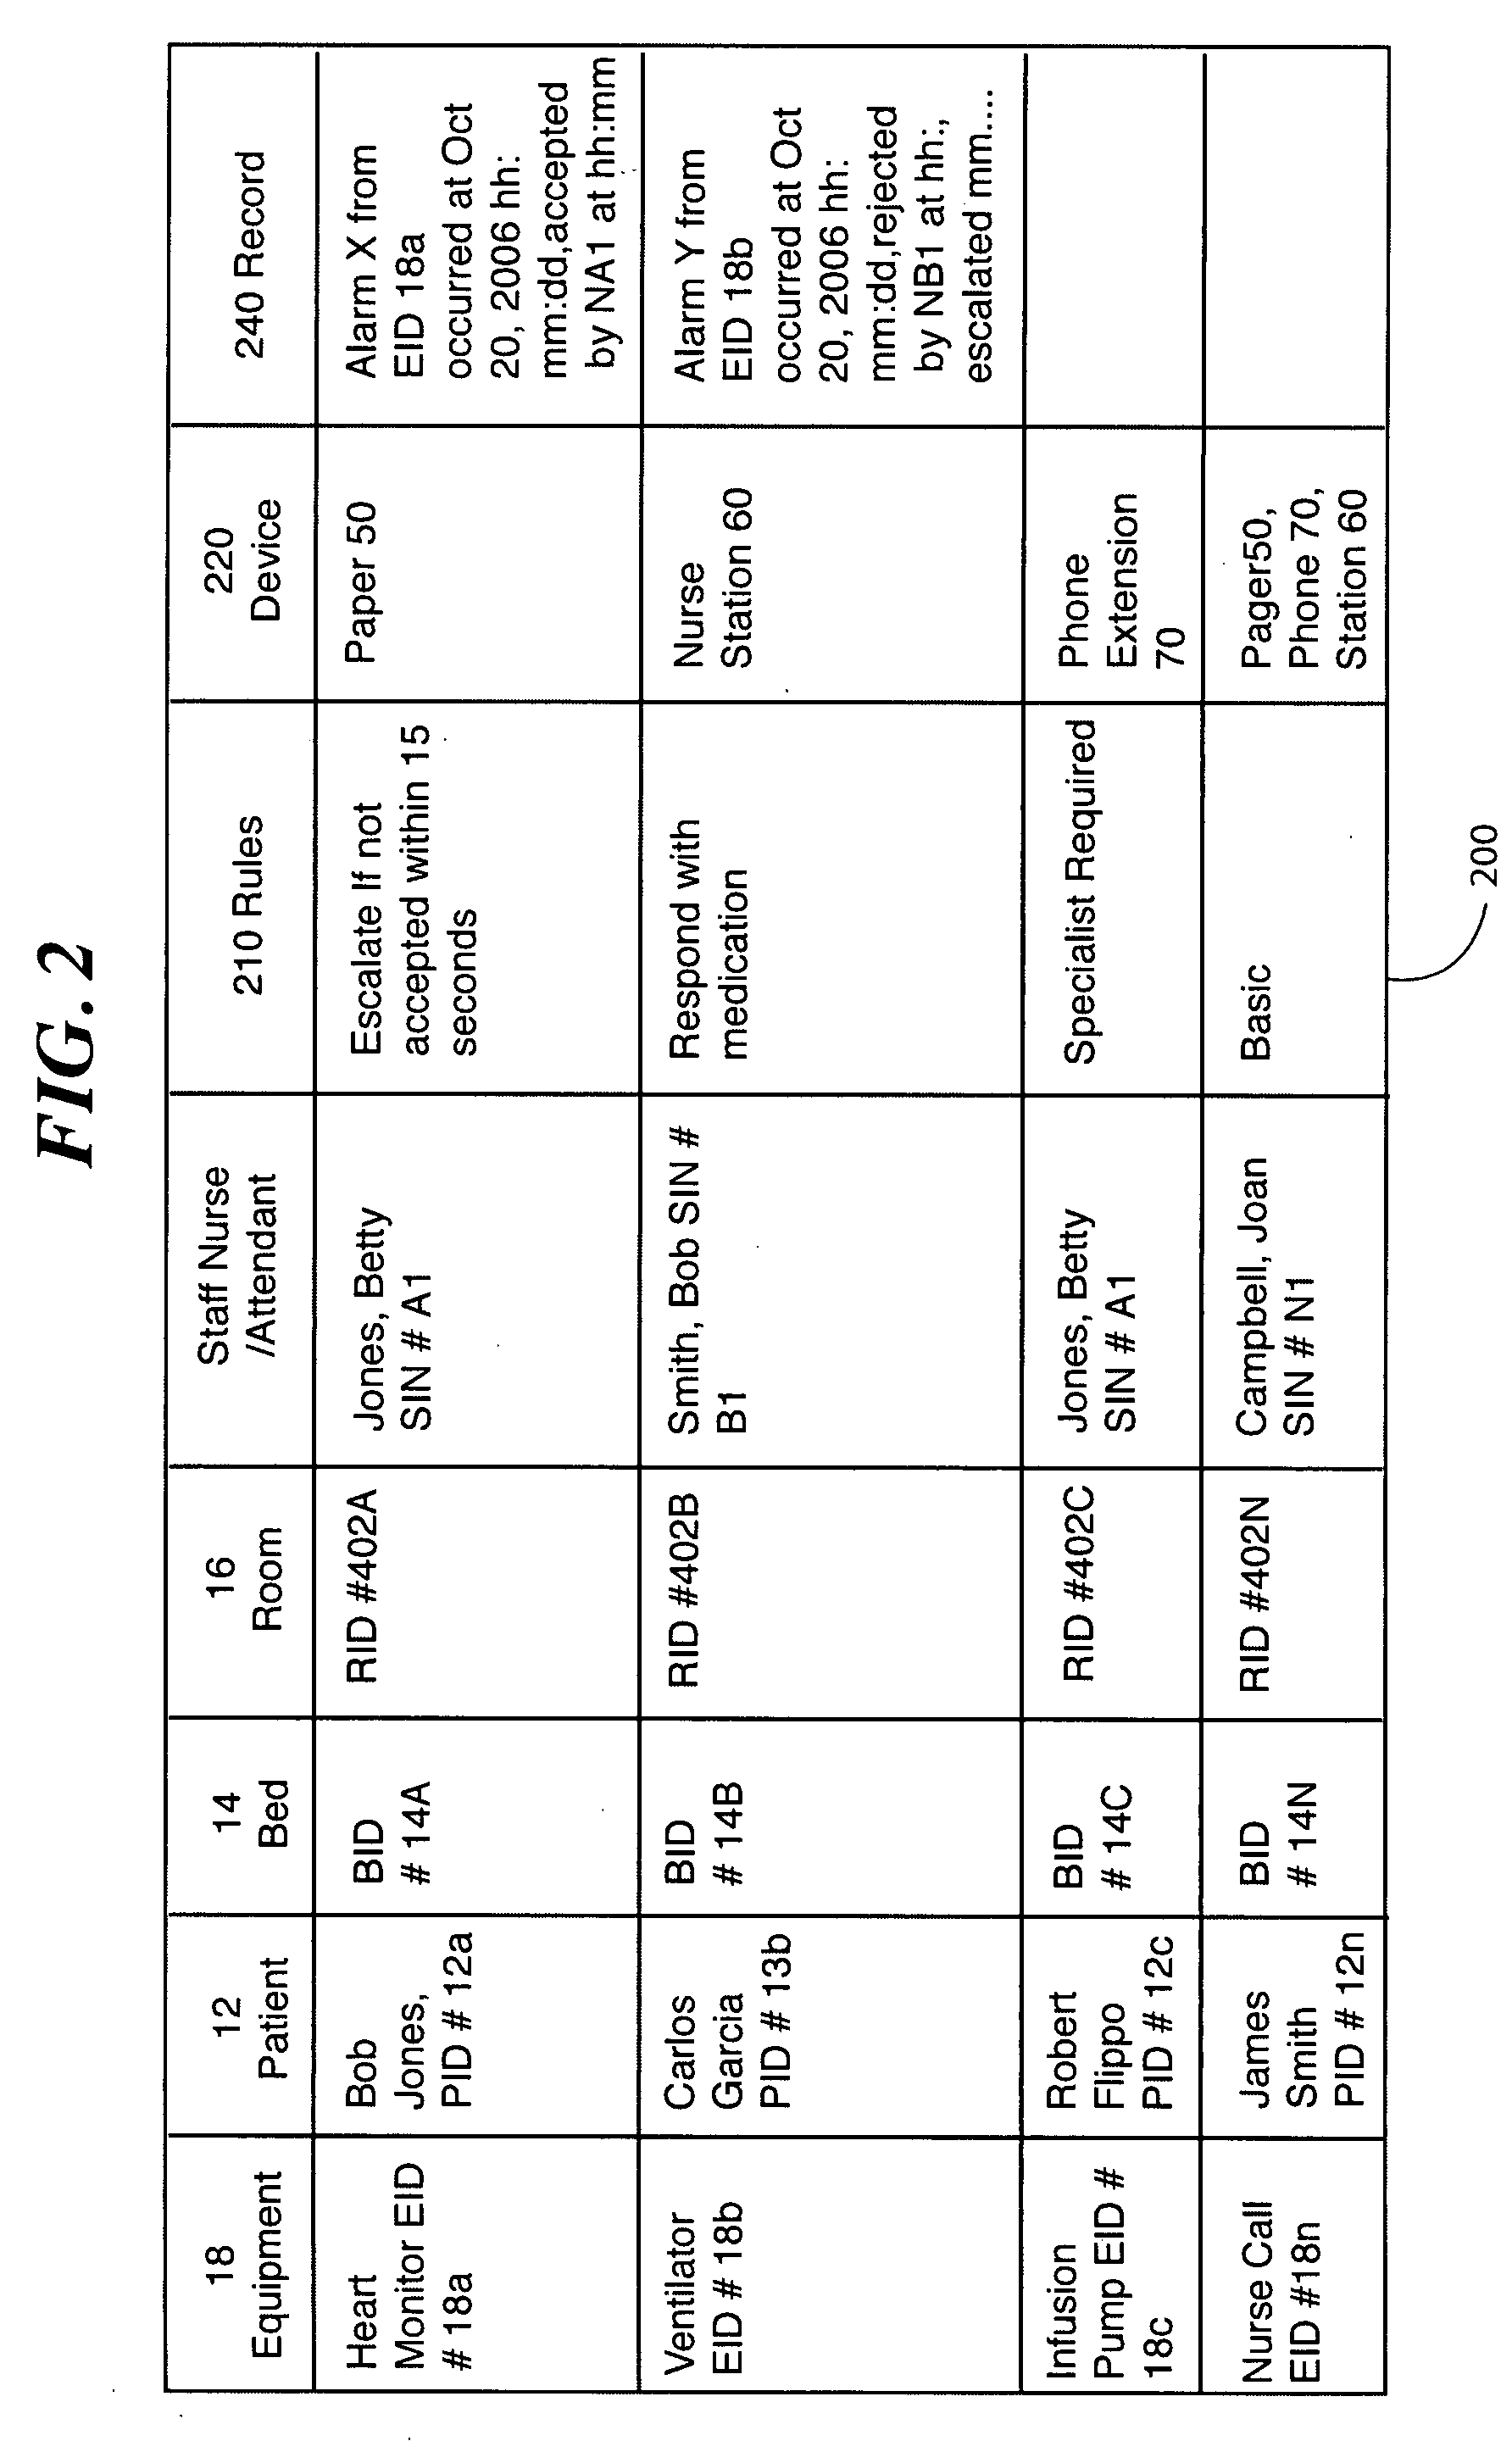 Method and system for medical alarm monitoring, reporting and normalization